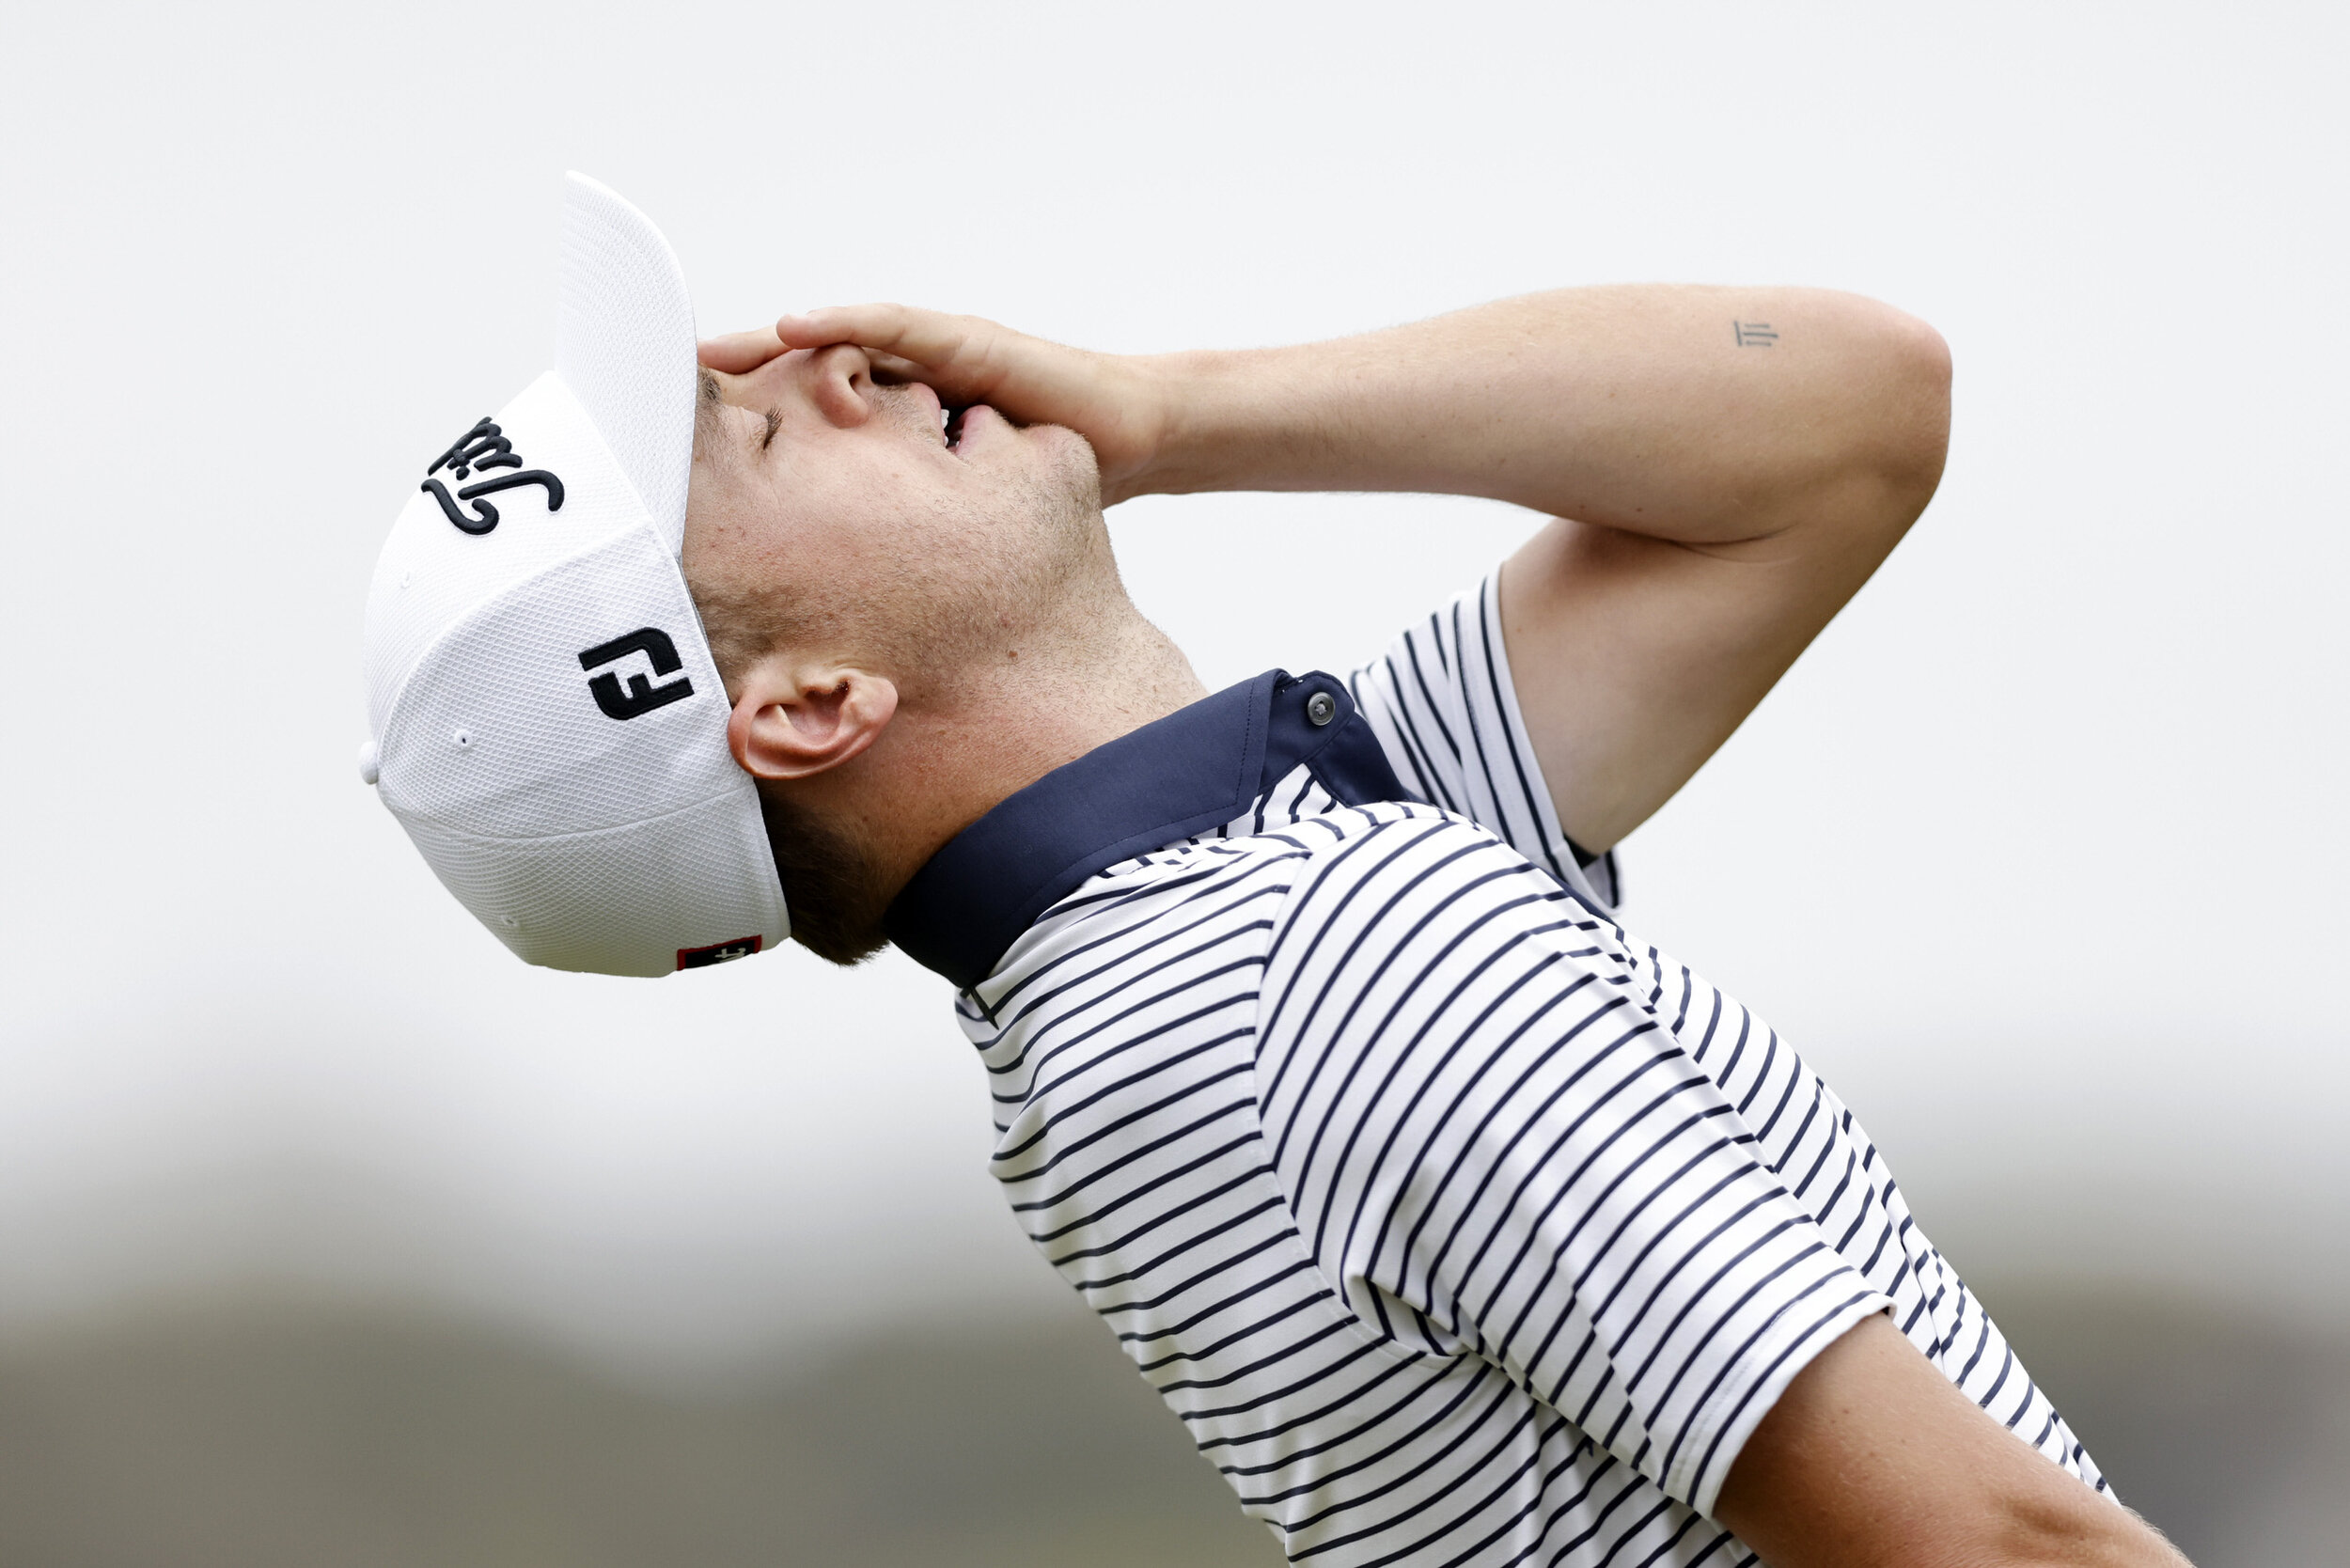  AUSTIN, TEXAS - MARCH 24: Justin Thomas of the United States reacts to a putt on the 14th hole in his match against Matt Kuchar of the United States during the first round of the World Golf Championships-Dell Technologies Match Play at Austin Countr